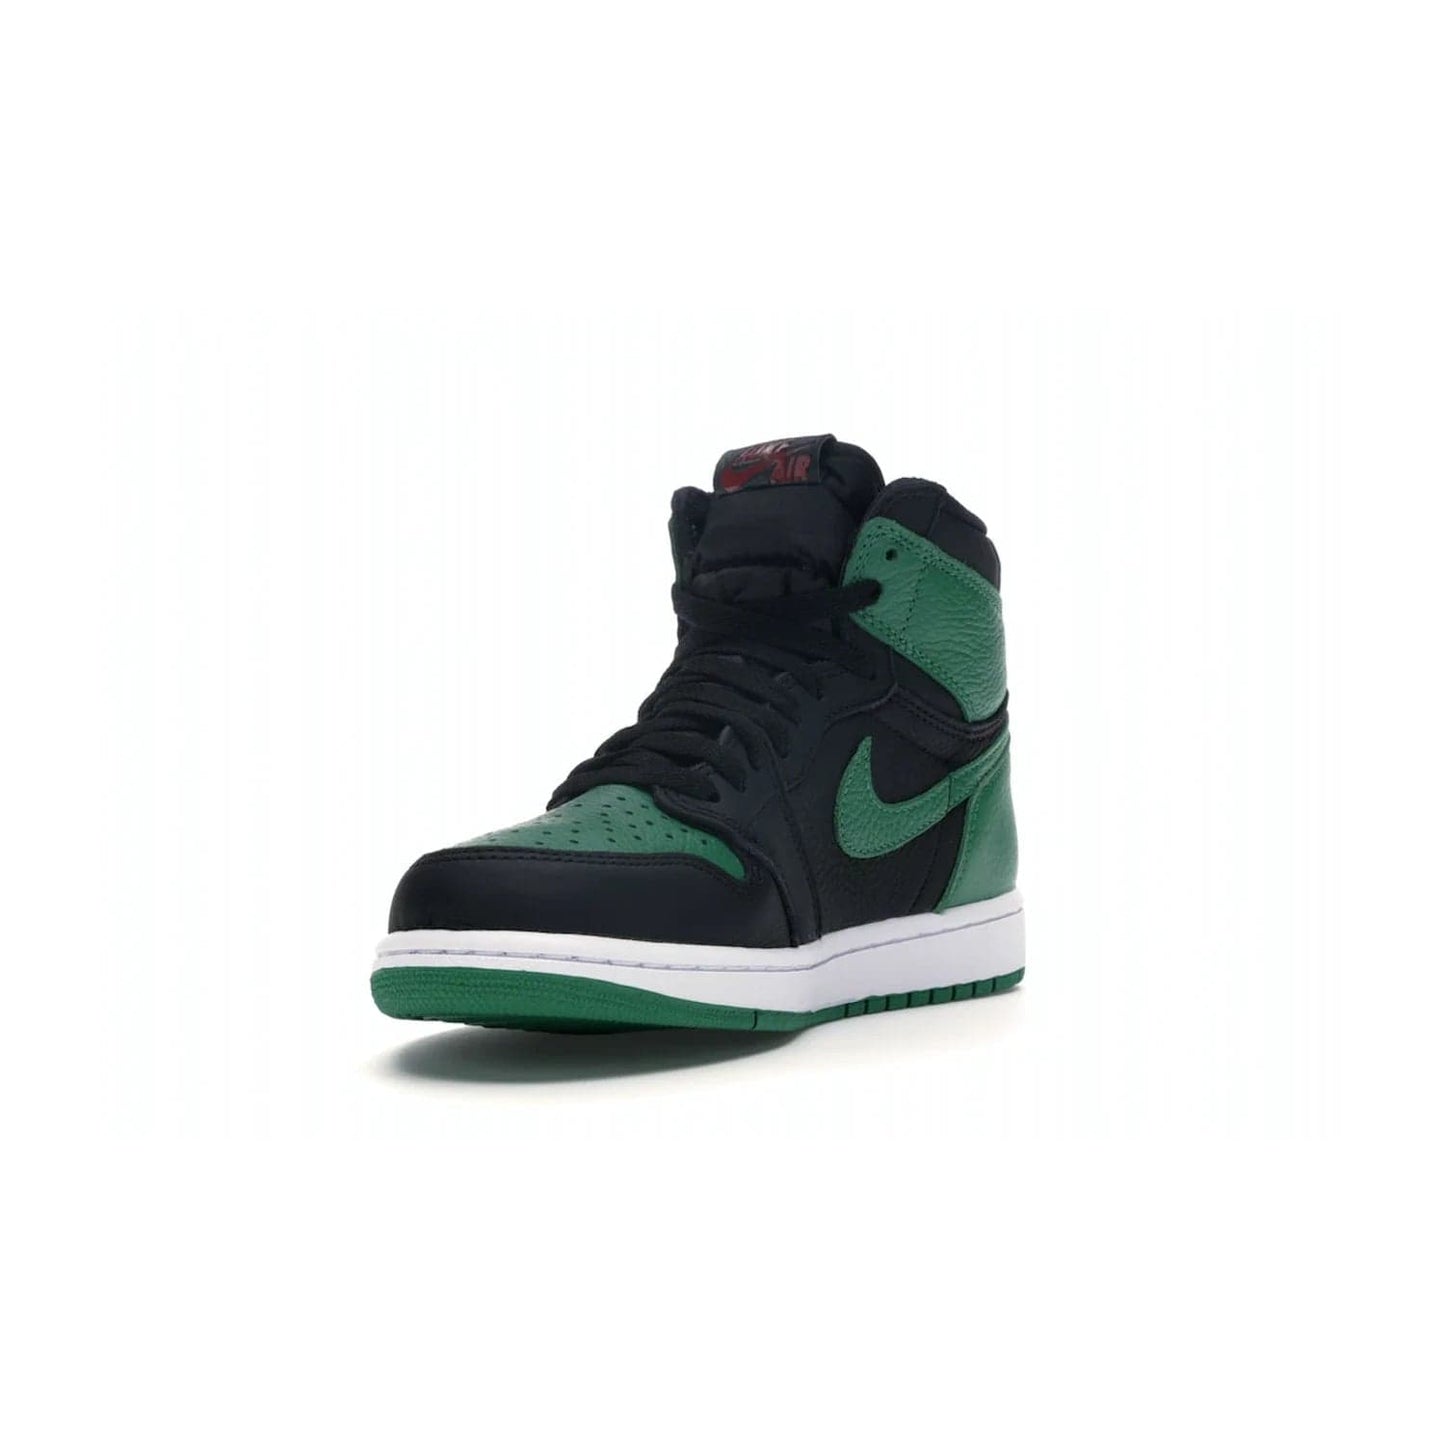 Jordan 1 Retro High Pine Green Black - Image 13 - Only at www.BallersClubKickz.com - Step into fresh style with the Jordan 1 Retro High Pine Green Black. Combining a black tumbled leather upper with green leather overlays, this sneaker features a Gym Red embroidered tongue tag, sail midsole, and pine green outsole for iconic style with a unique twist.